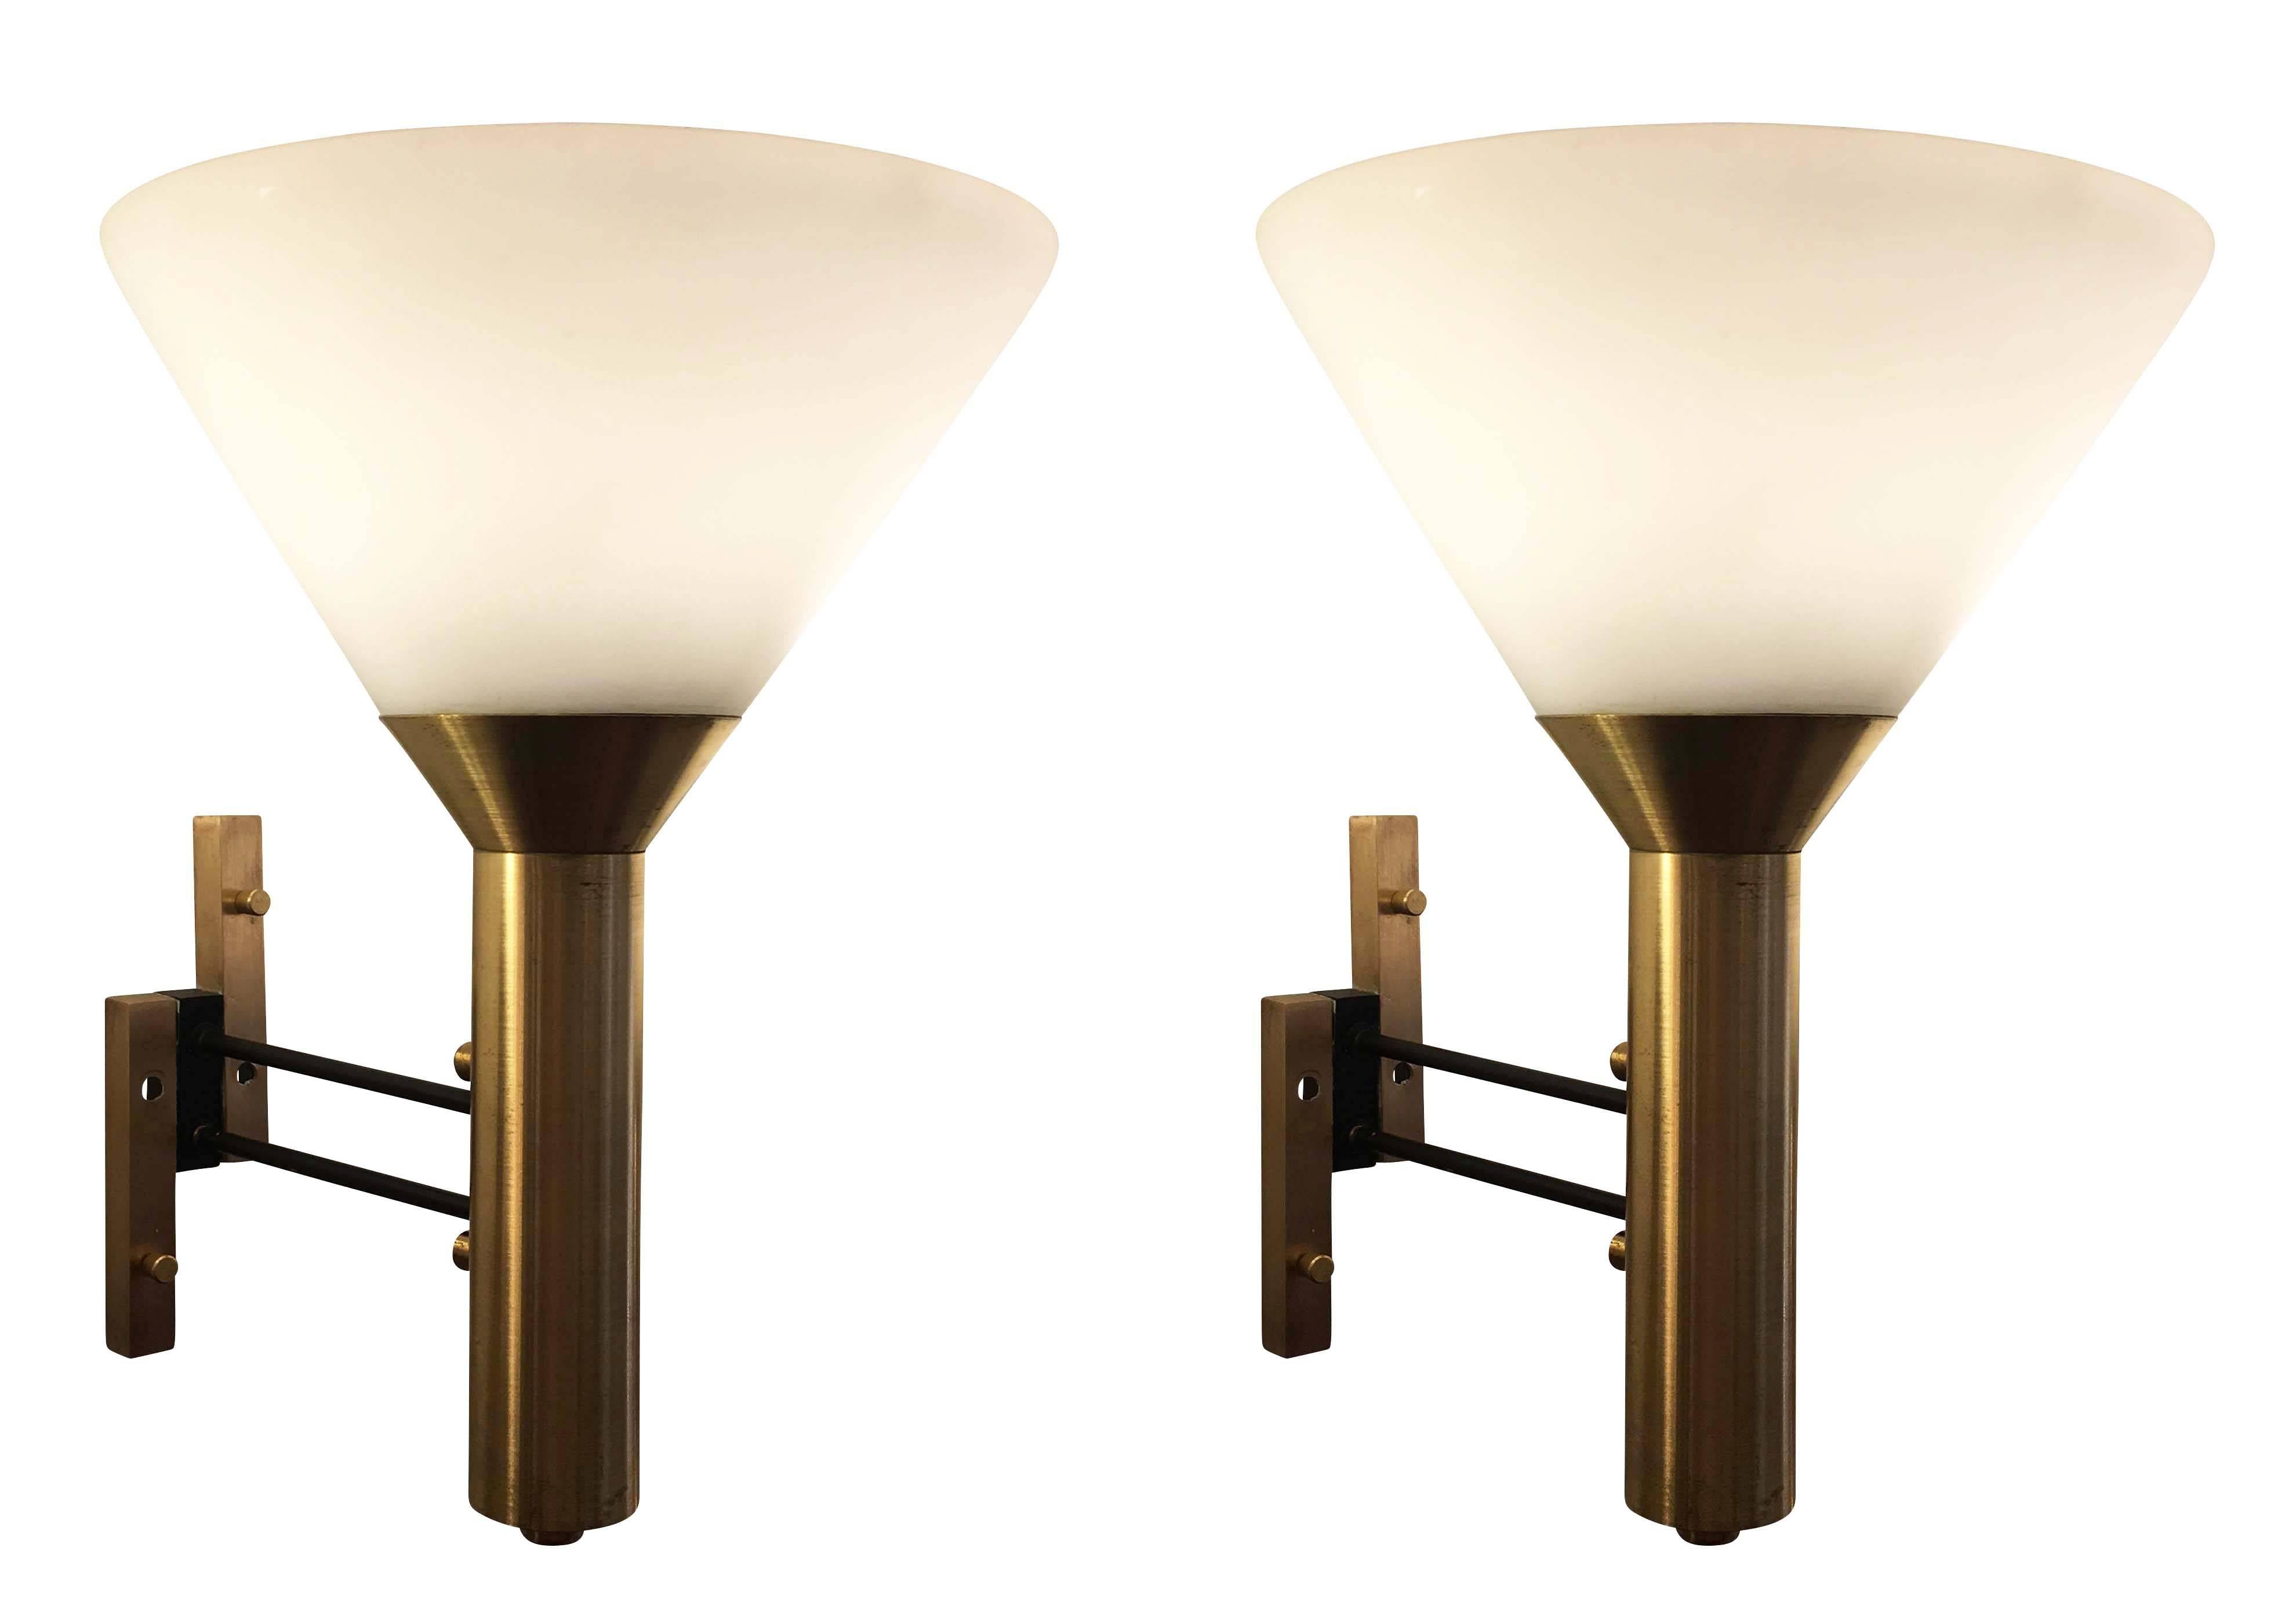 Elegant pair of funnel shaped Stilnovo wall lights. The glass is frosted white and the frame is brass and lacquered black. Each holds one regular socket.